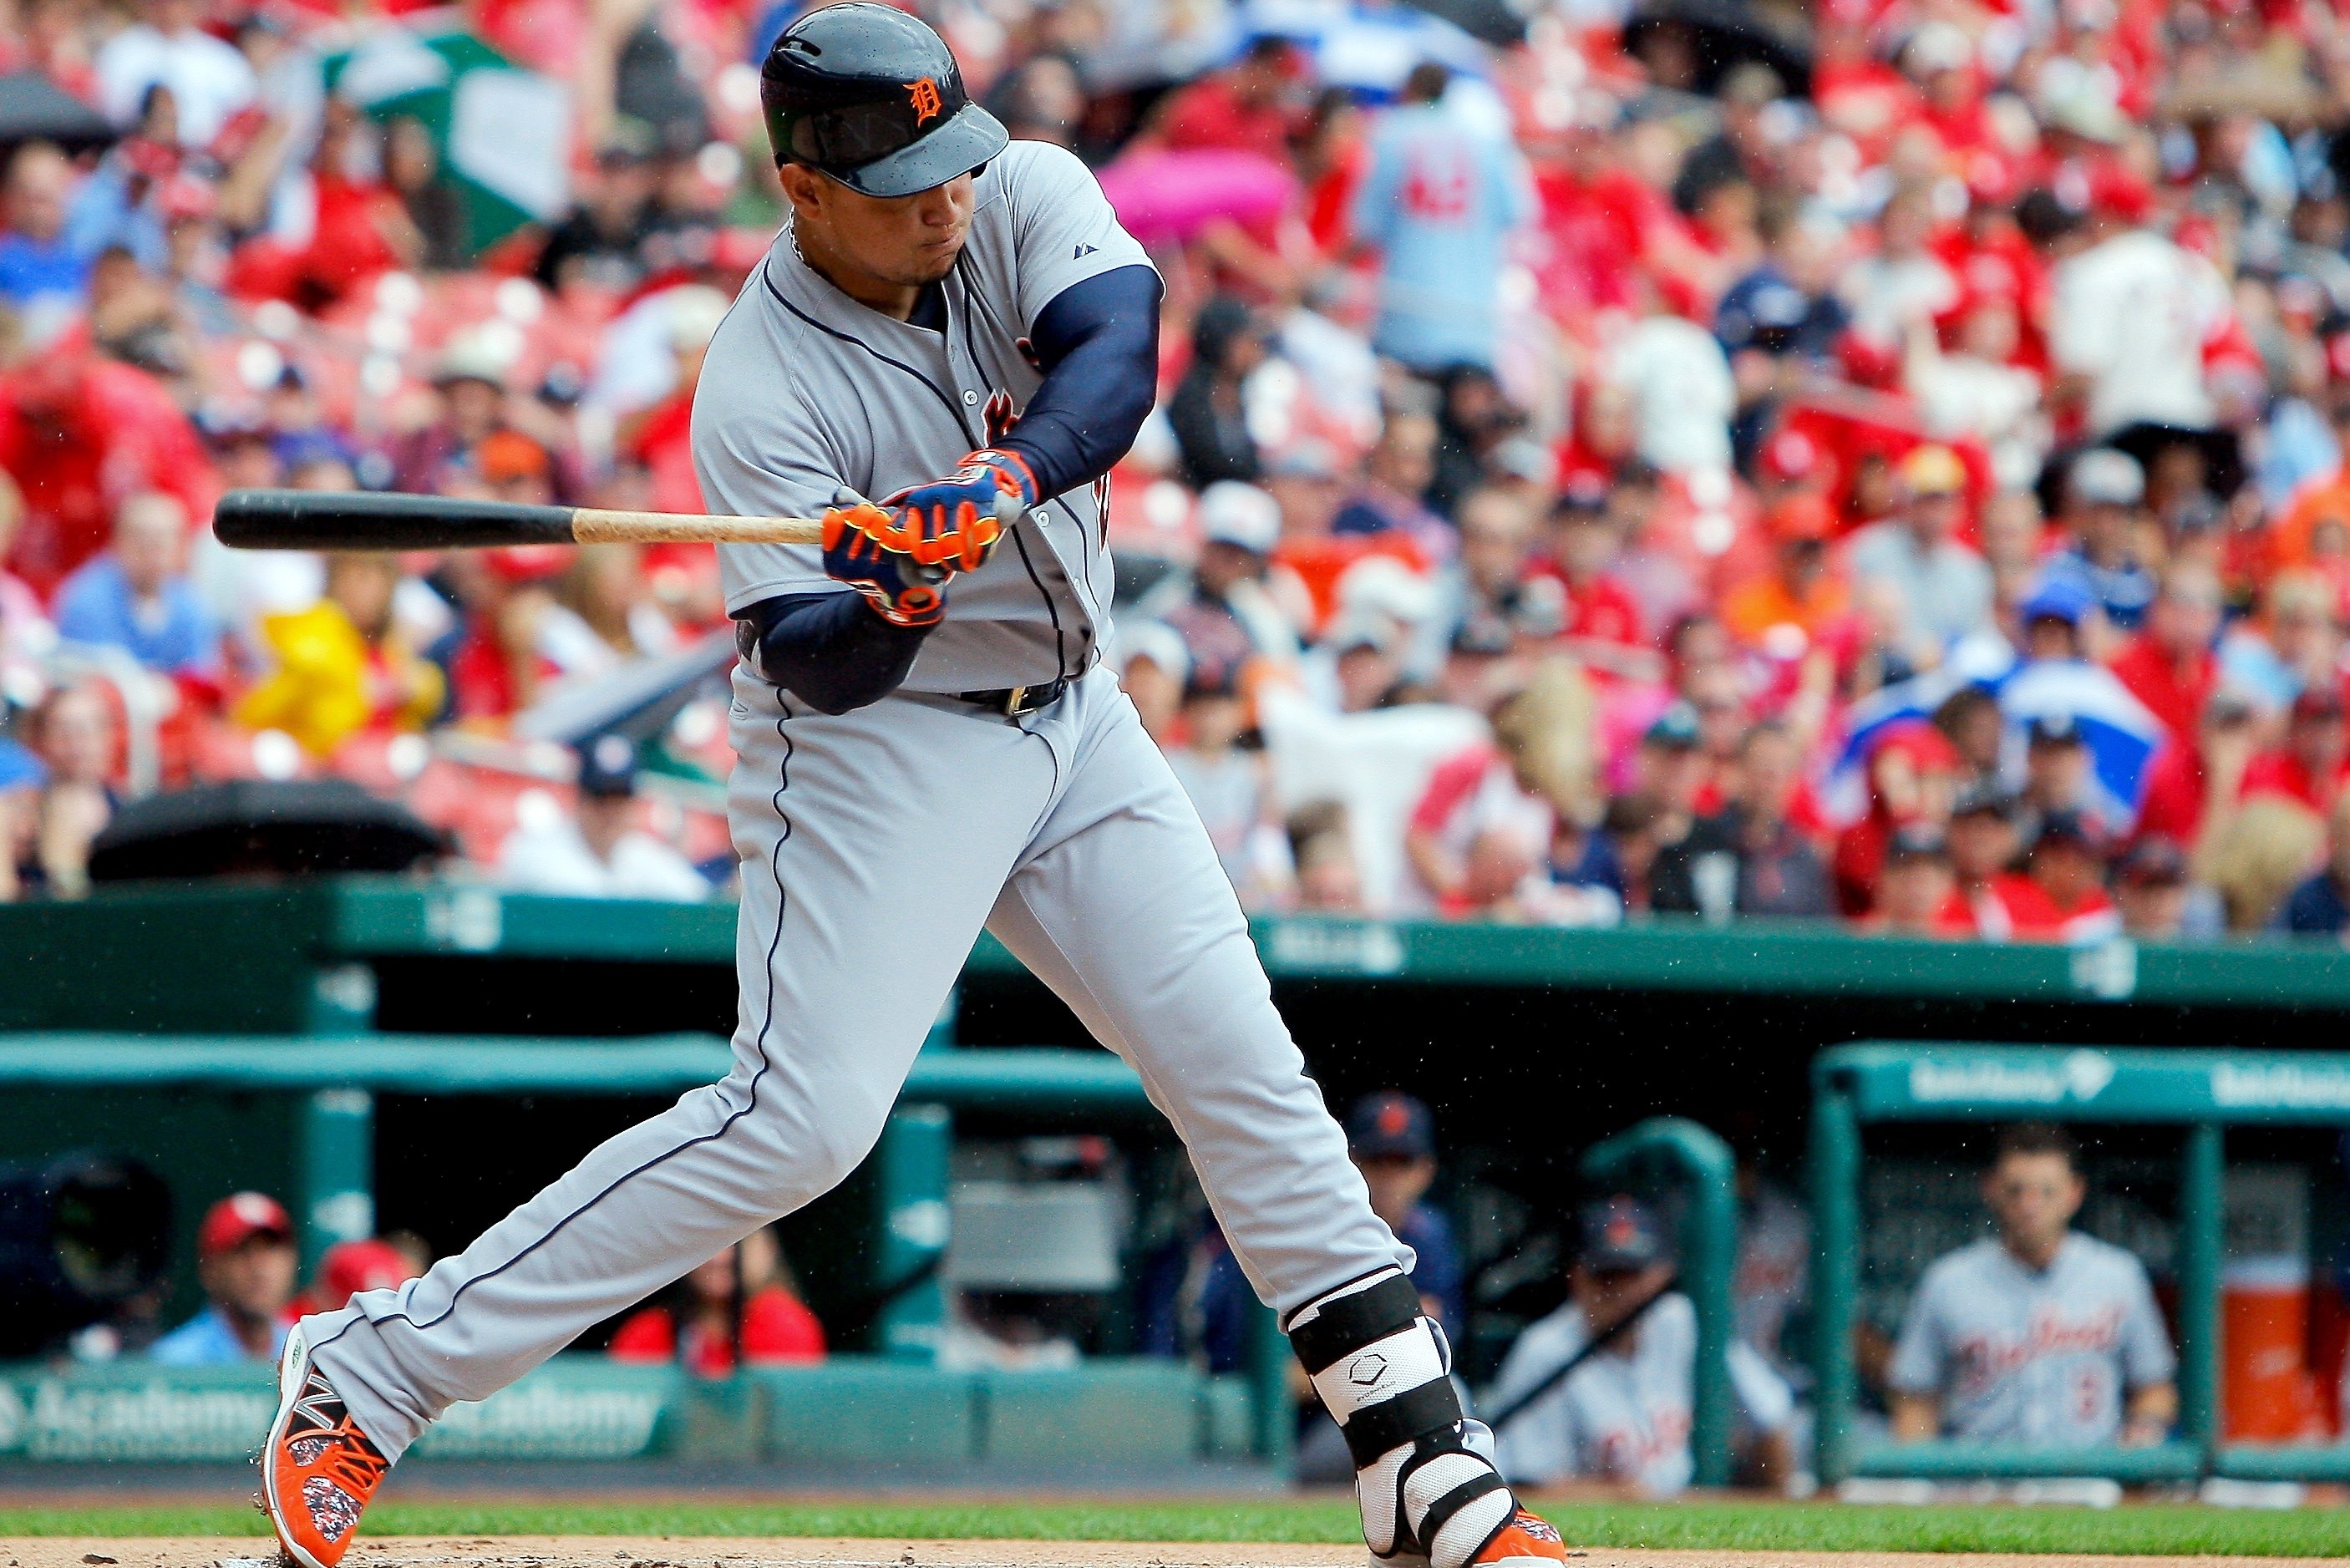 Miguel Cabrera does not understand why his apparent home run was